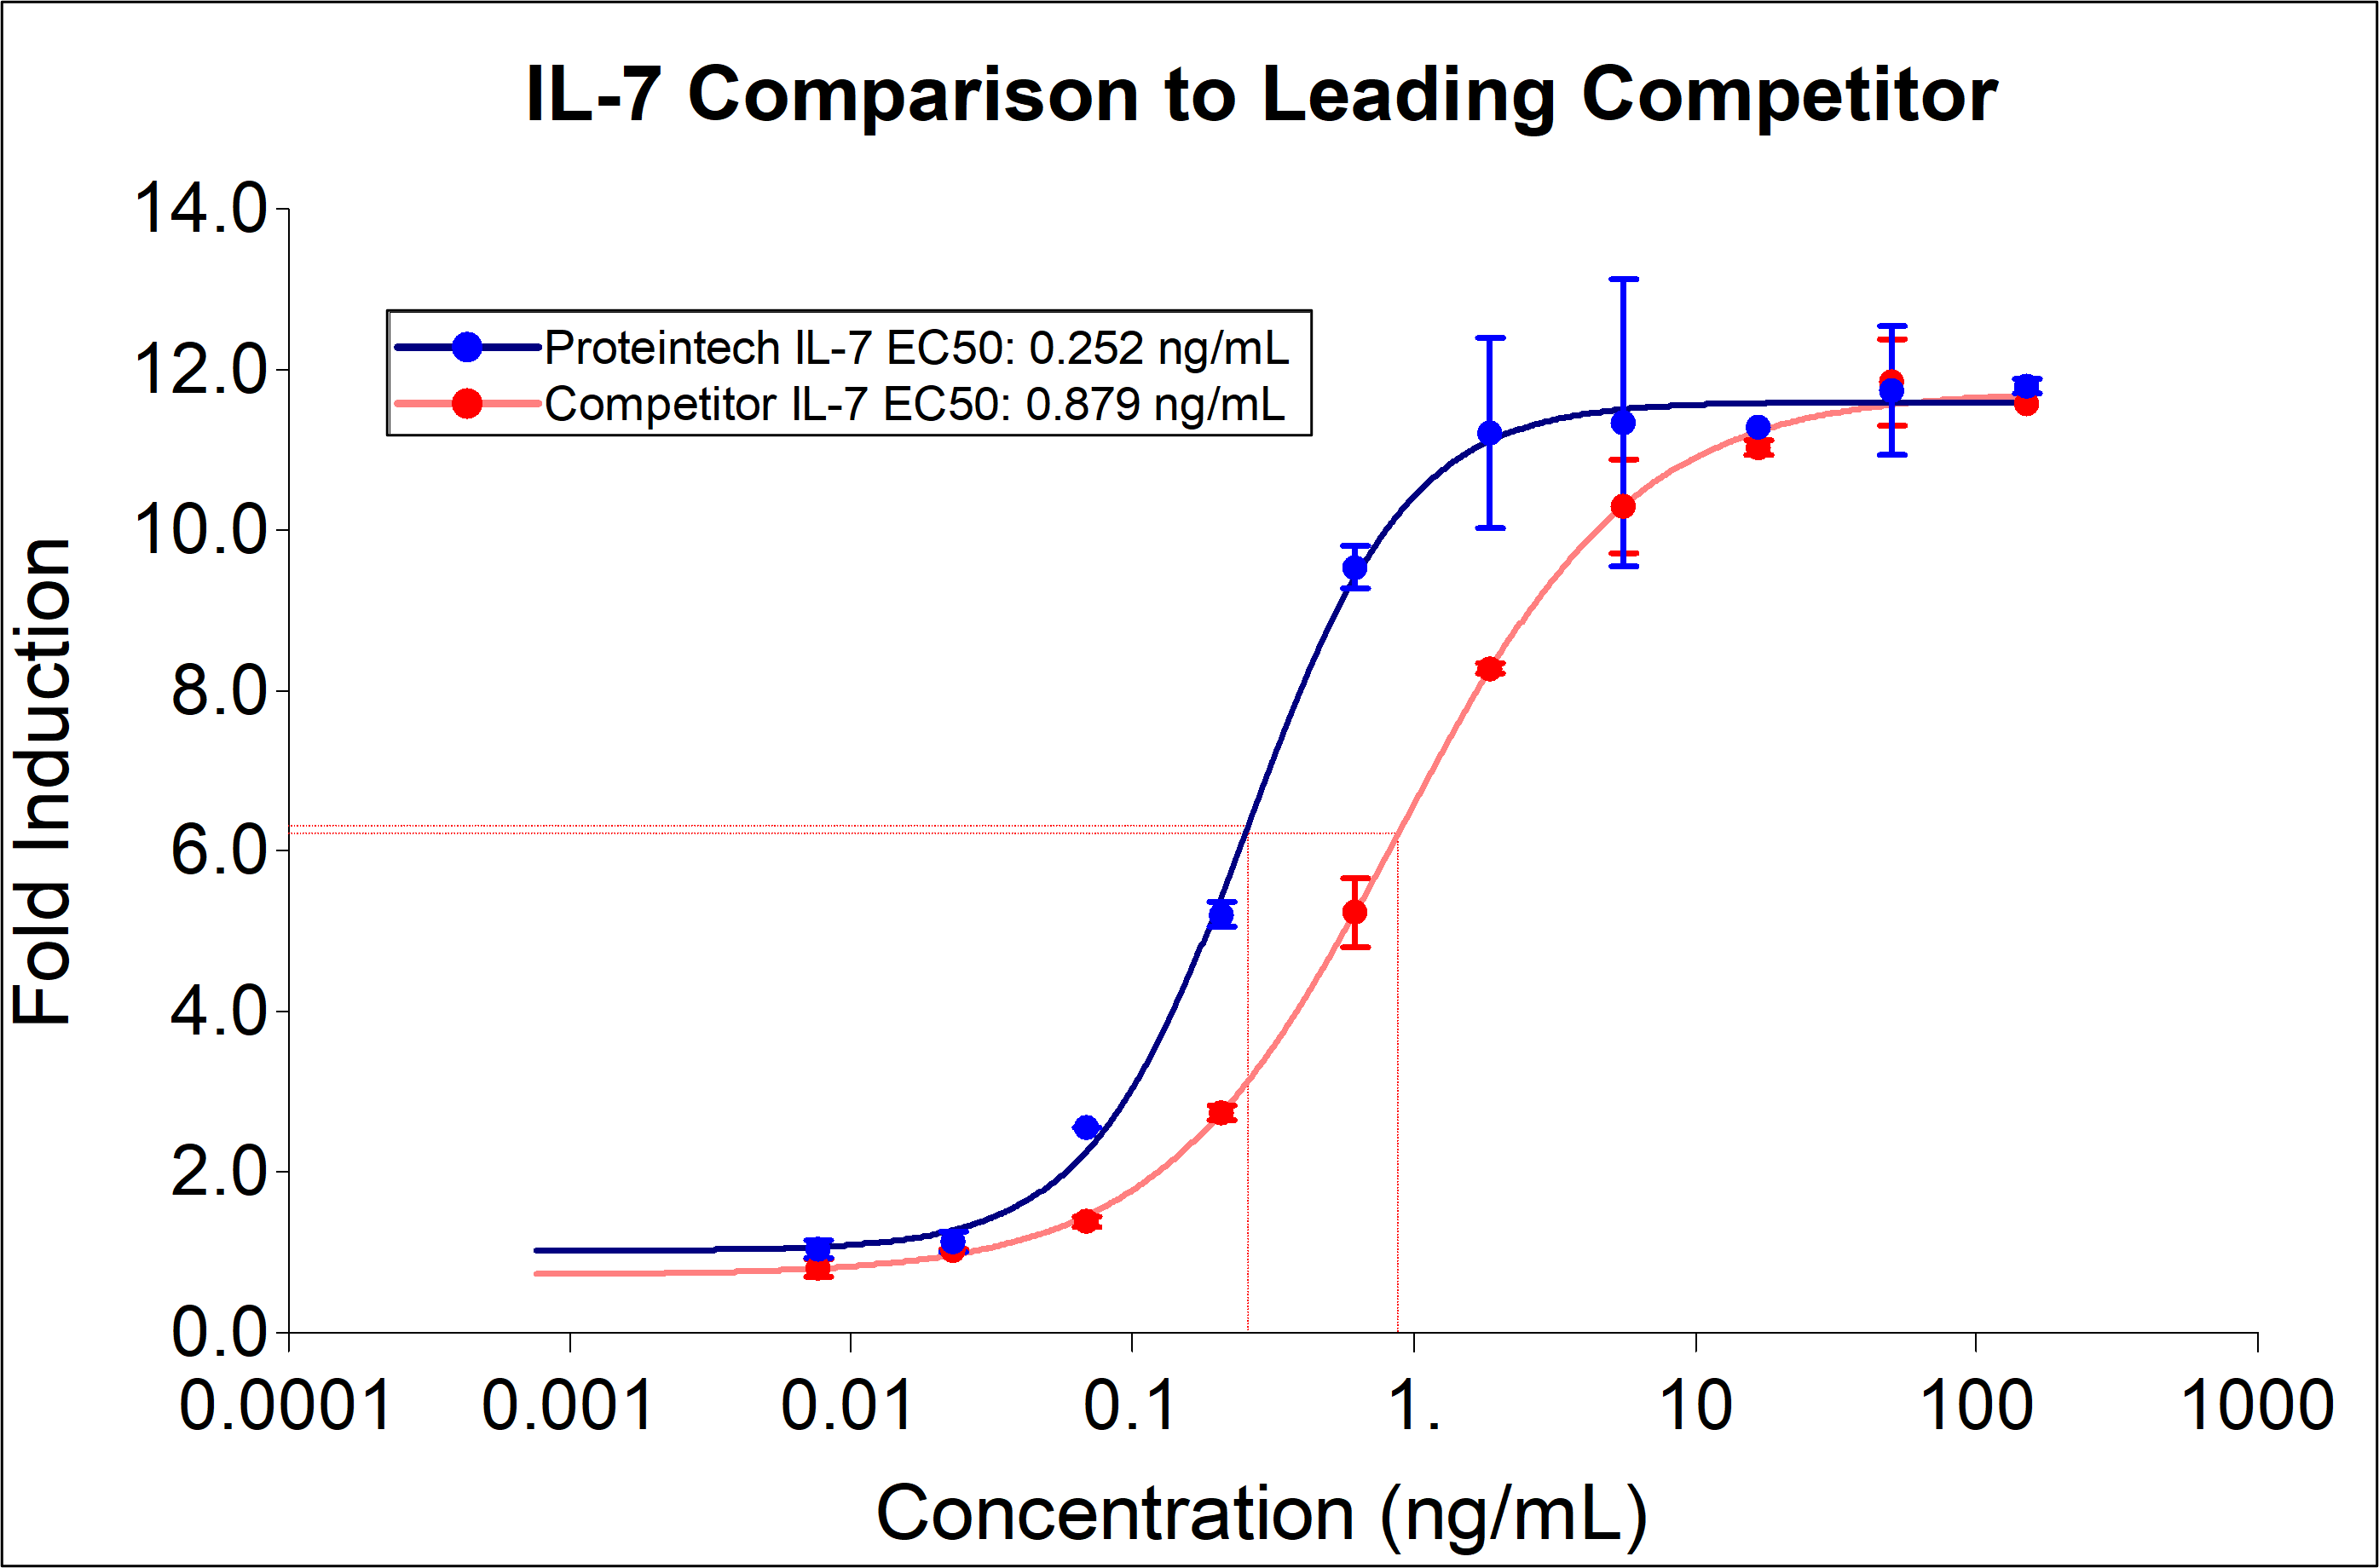 Proteintech IL-7 (HZ-1281) demonstrates 3-fold lower EC50 and equivalent induction of proliferation compared to a leading competitor. Recombinant human IL-7 stimulates dose-dependent proliferation of murine 2E8 human cell line. Cell number was quantitatively assessed by PrestoBlue® Cell Viability Reagent. 2E8 cells were treated with increasing concentrations of recombinant IL-7 for 120 hours. The EC50 was determined using a 4-parameter non-linear regression model. The EC50 range is 0.1-1.4 ng/mL.